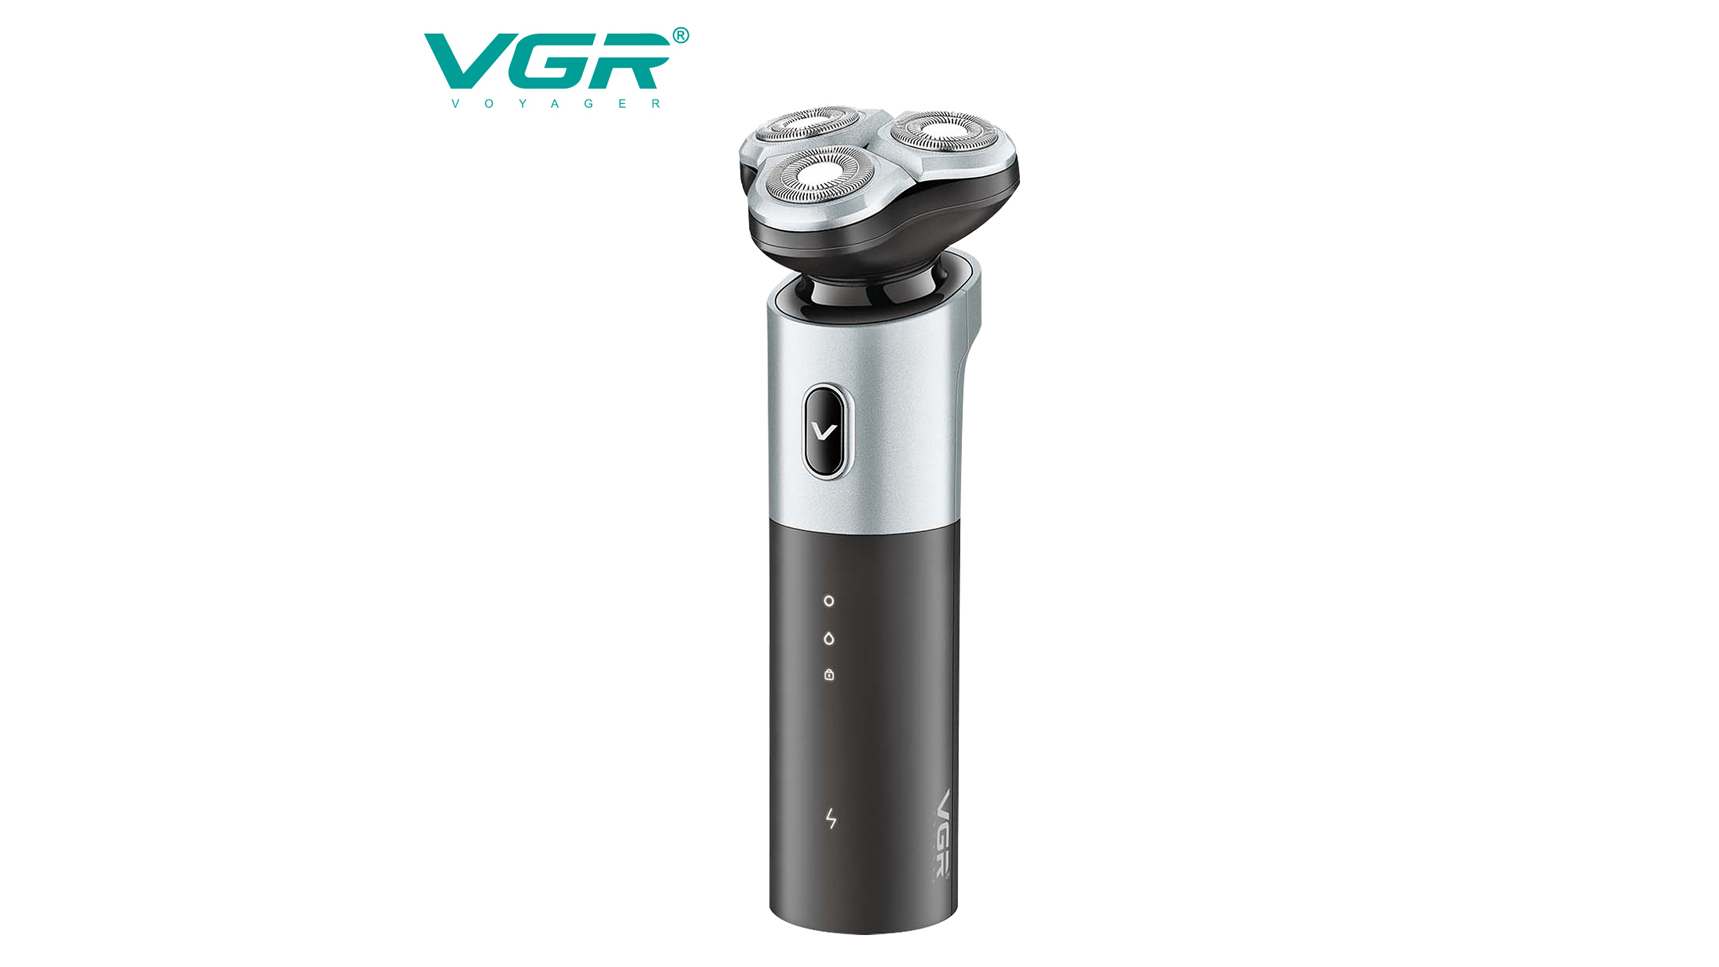 VGR  V-343 waterproof professional washable IPX7 rechargeable electric beard shaver for men with LED display1